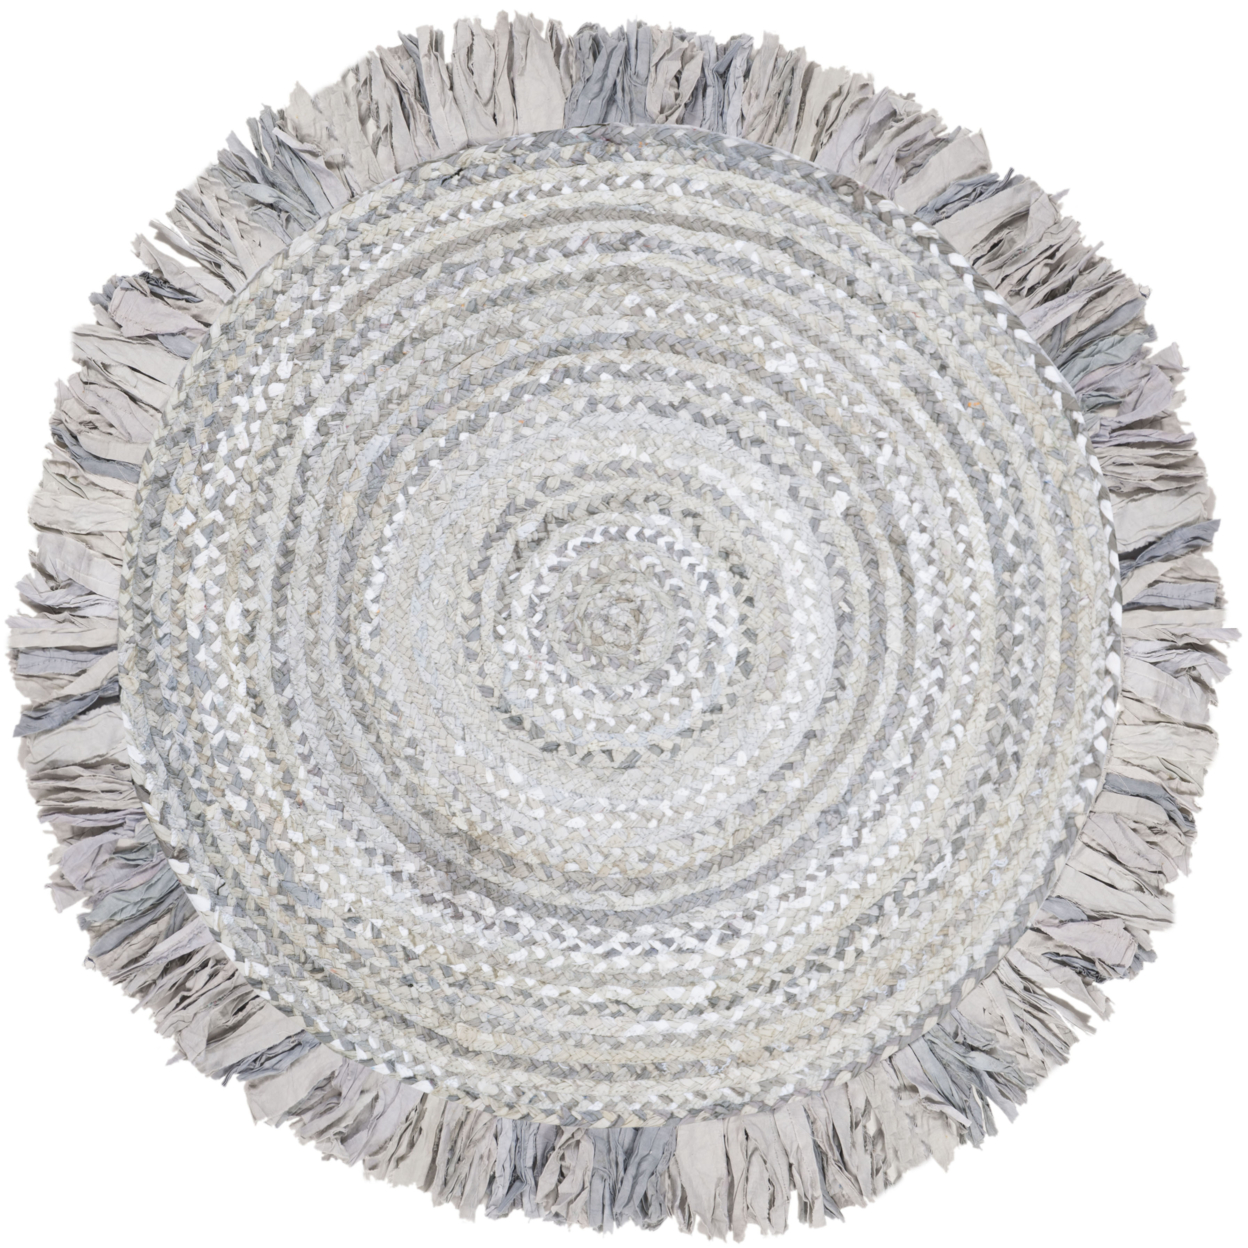 SAFAVIEH Braided Collection BRD451F Handwoven Grey Rug - 6' X 9' Oval